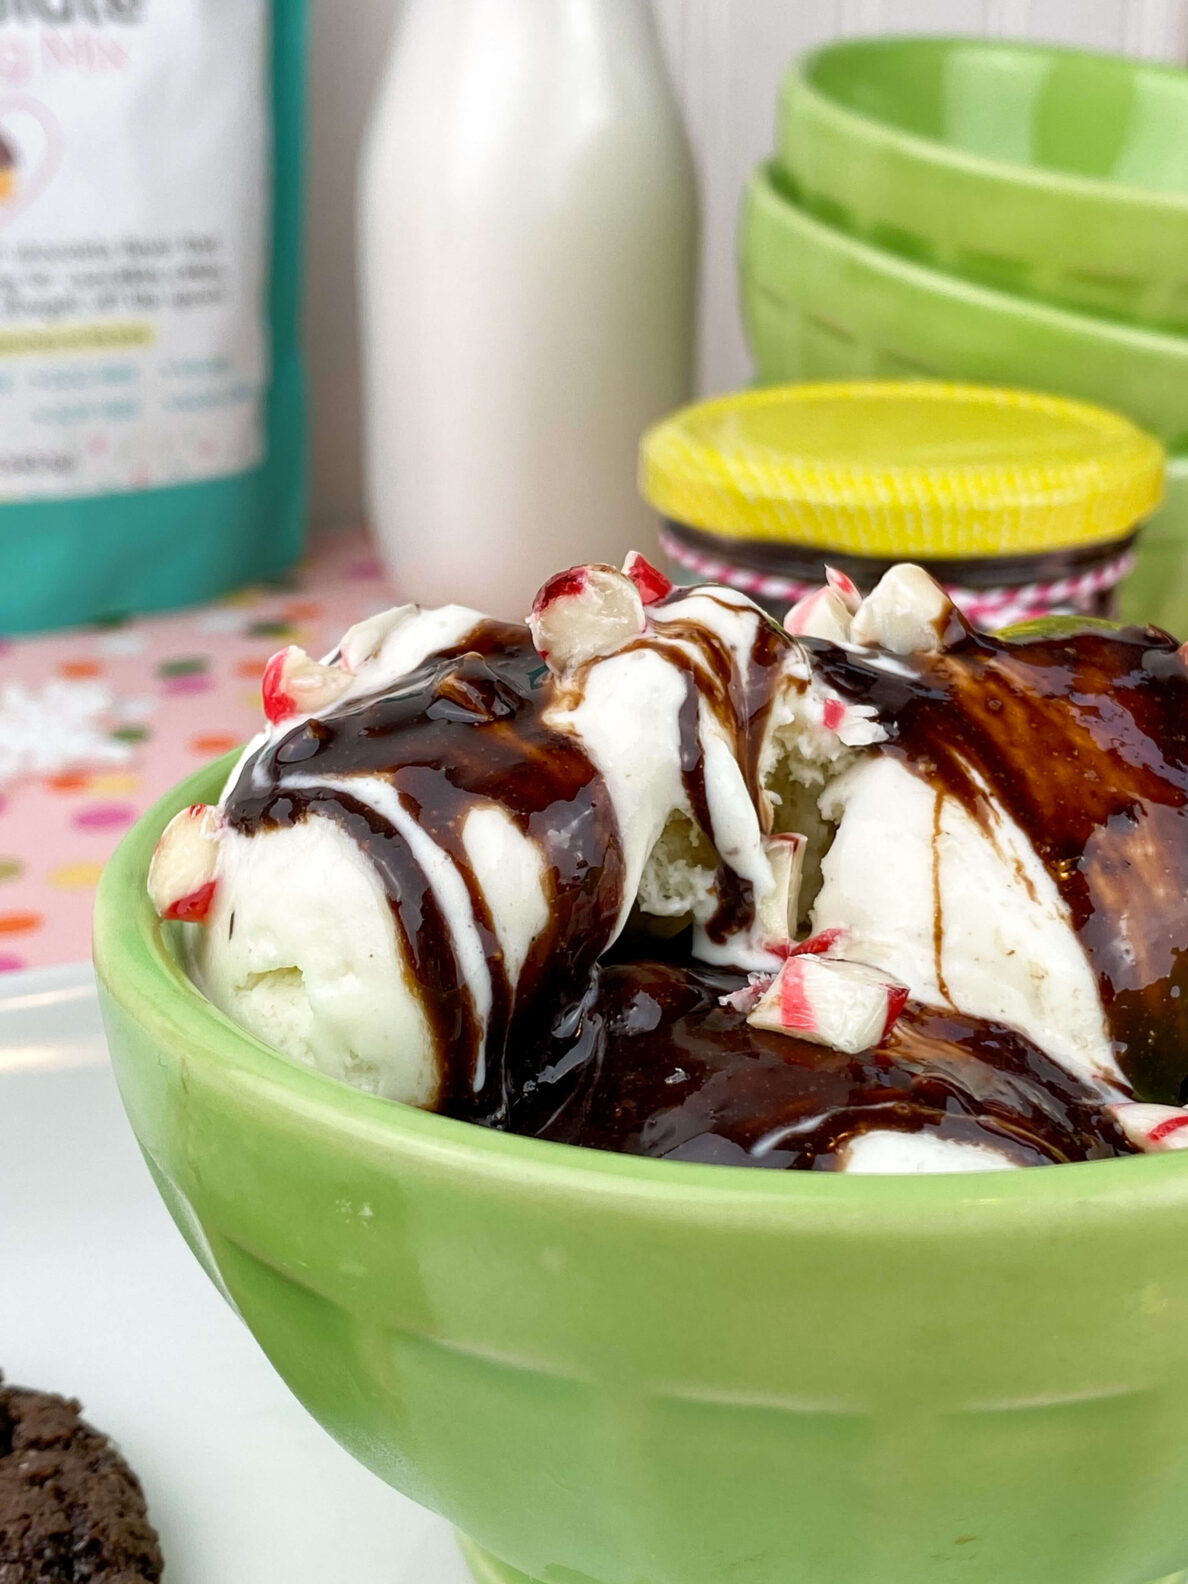 Kate's Safe & Sweet - Peppermint Hot Fudge in Bowl